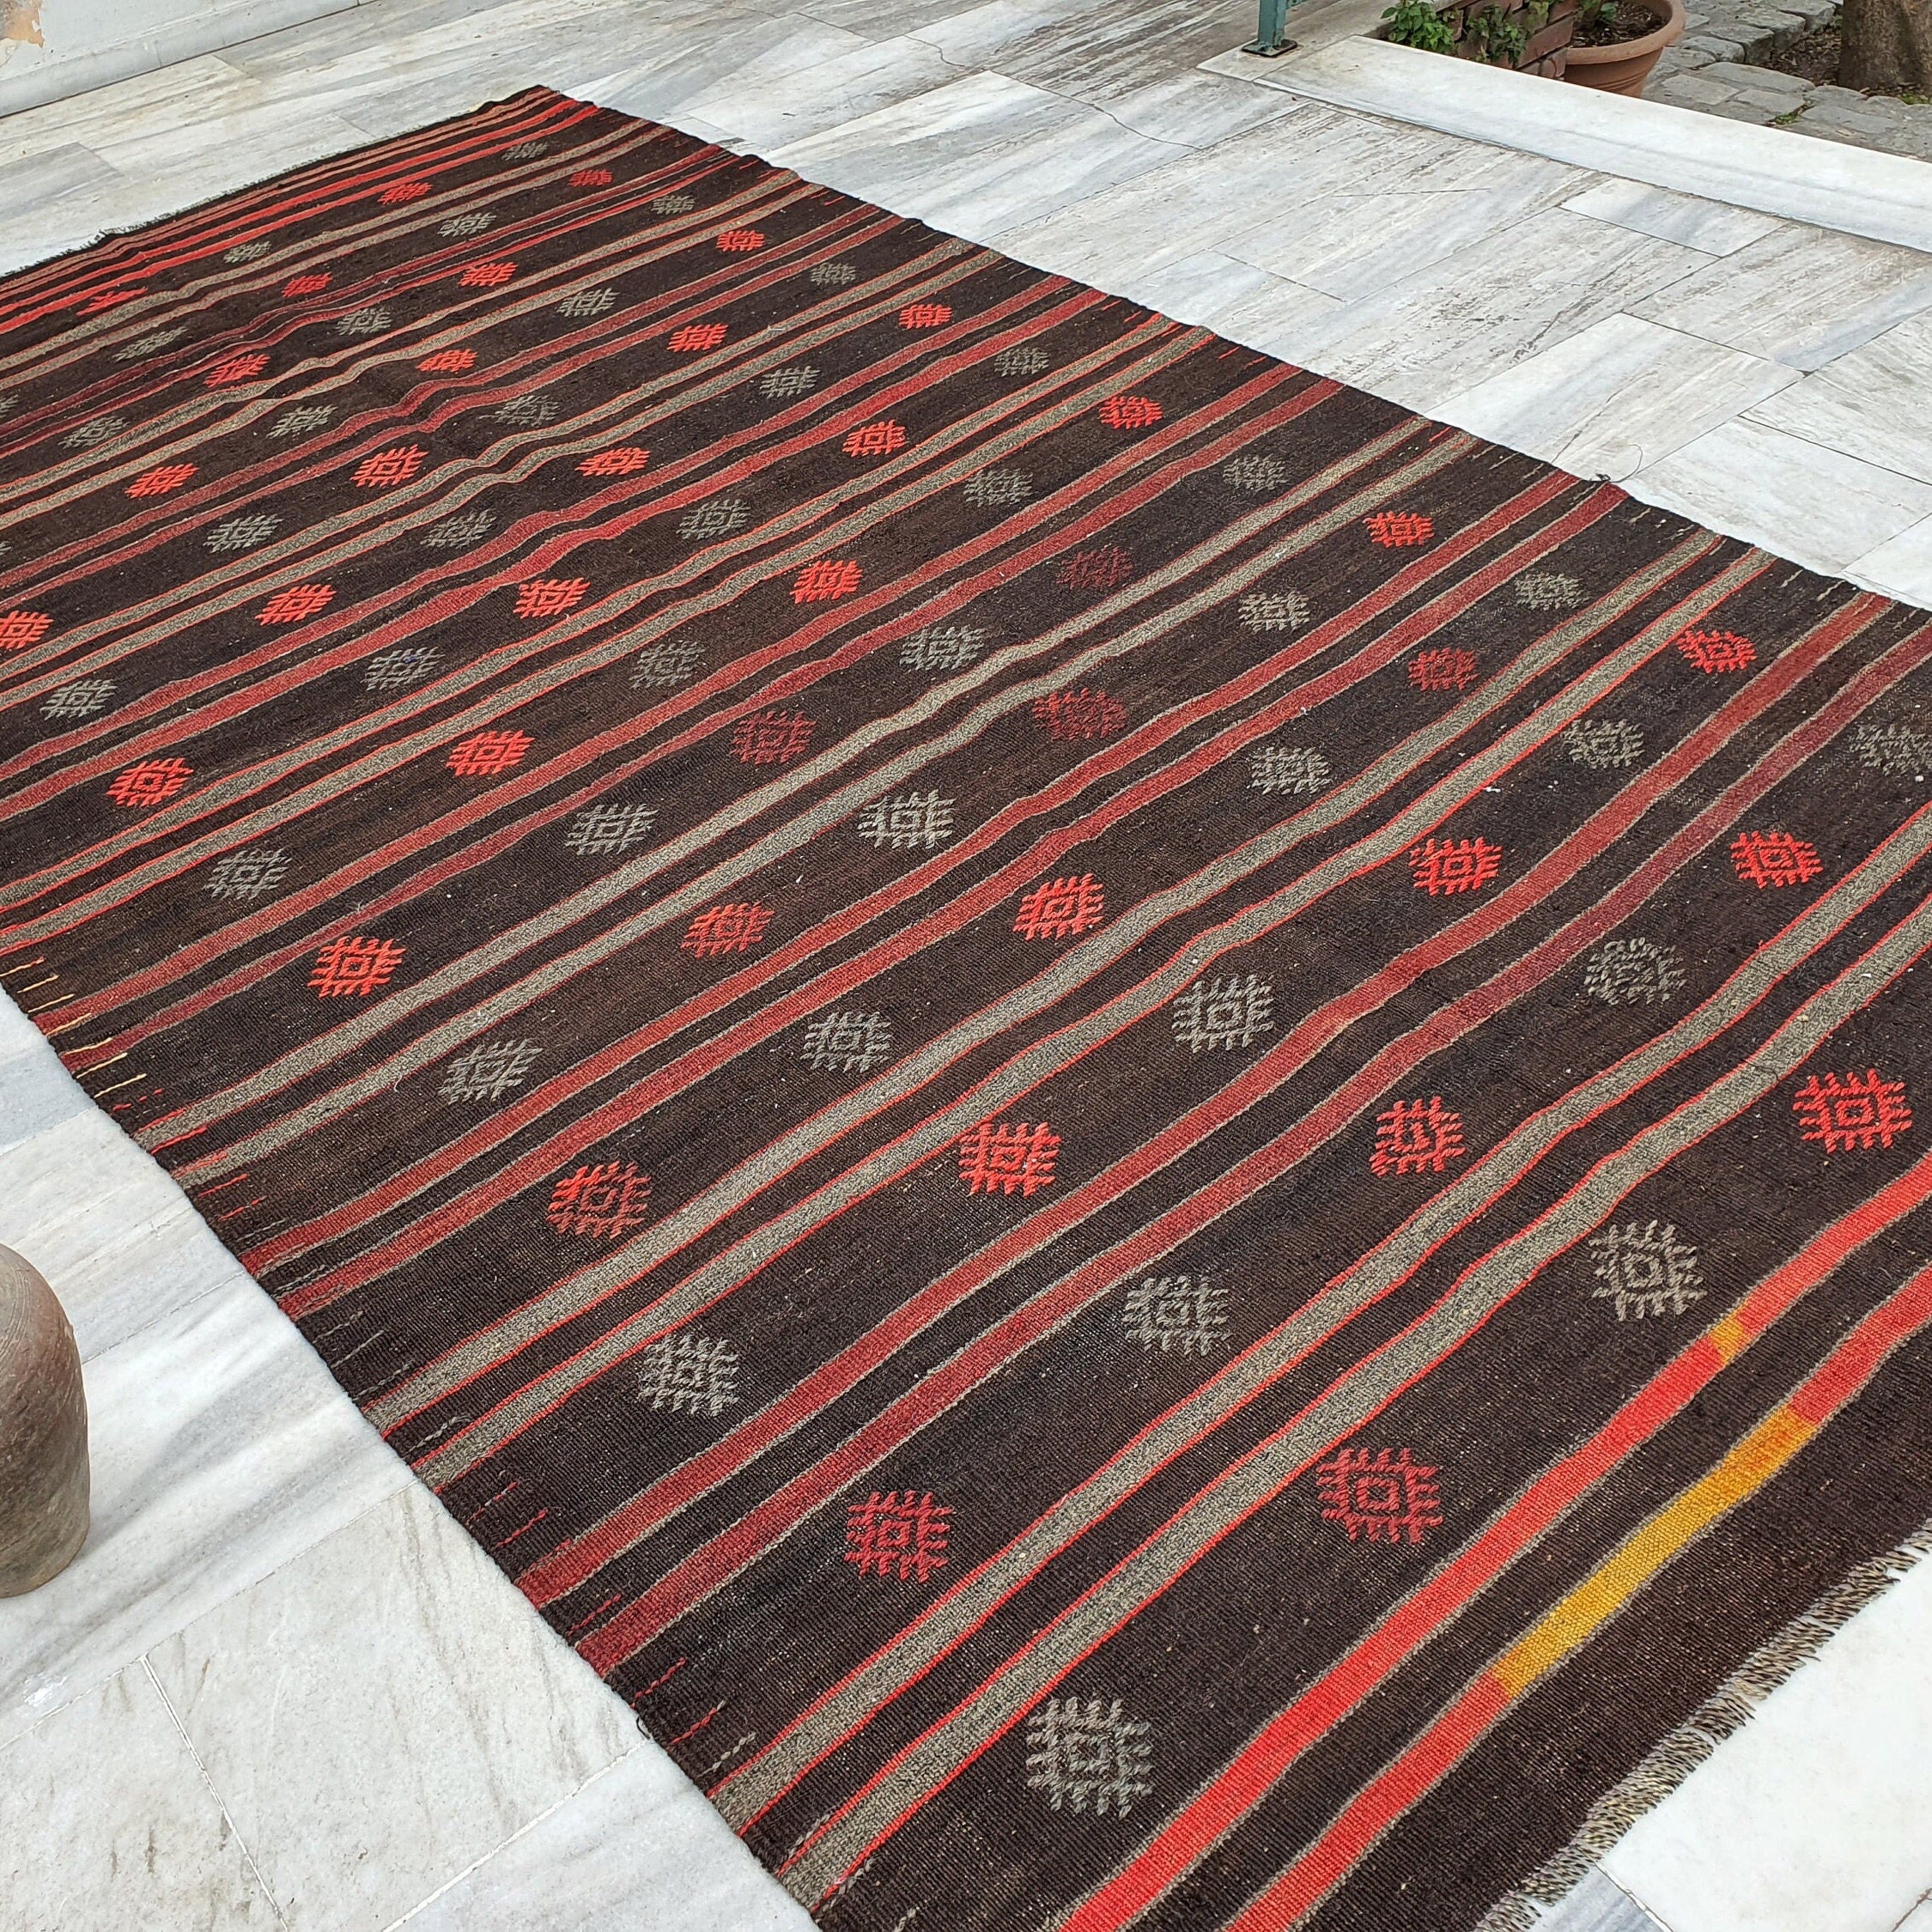 Turkish Kilim Floor Rug 11 x 6 ft X Long Brown and Orange Striped Embroidered Cicim for Lounge Kitchen Bedroom, Boho Rustic Persian Area Rug